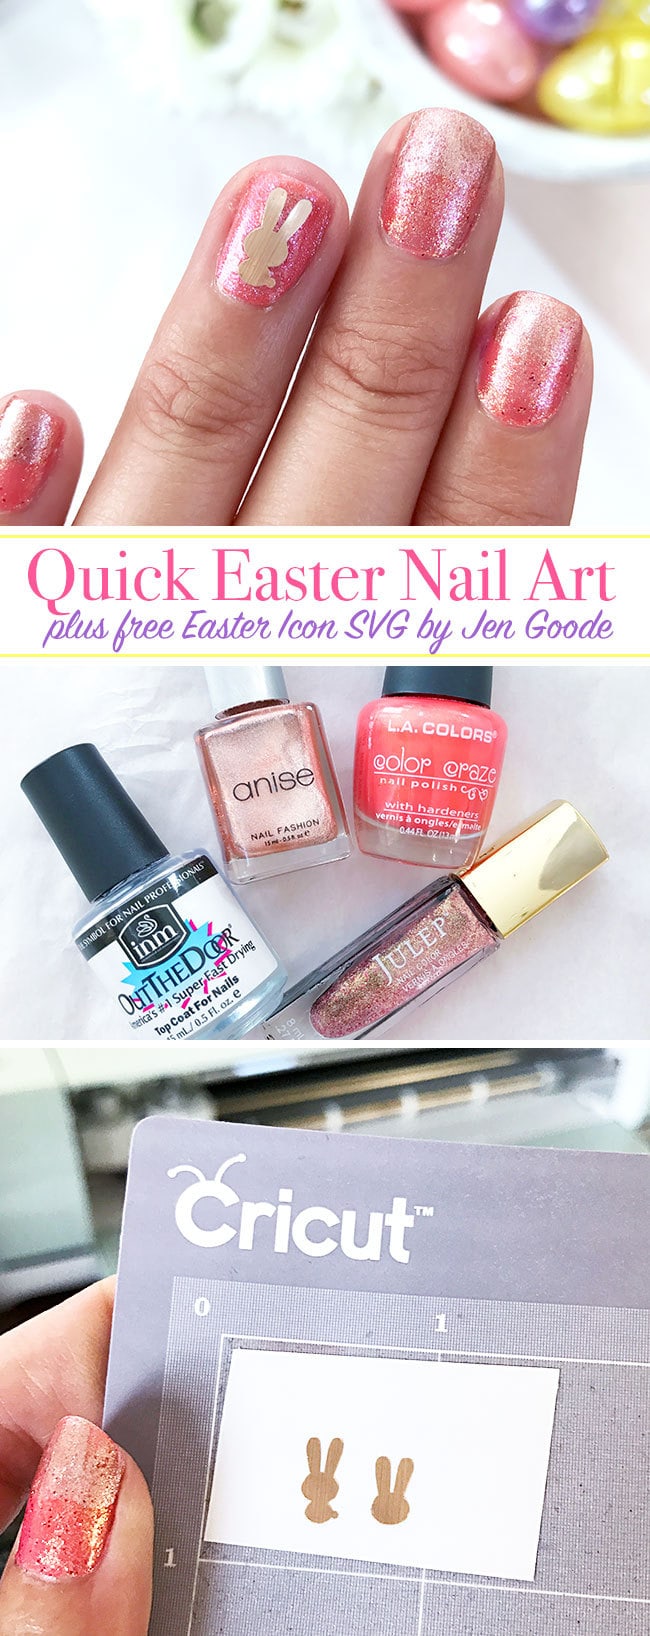 Quick Easter bunny nail art and free SVG by Jen Goode. This is a quick way to dress up your nails in just minutes. Get the tips and tricks to making the perfect Easter nail art!